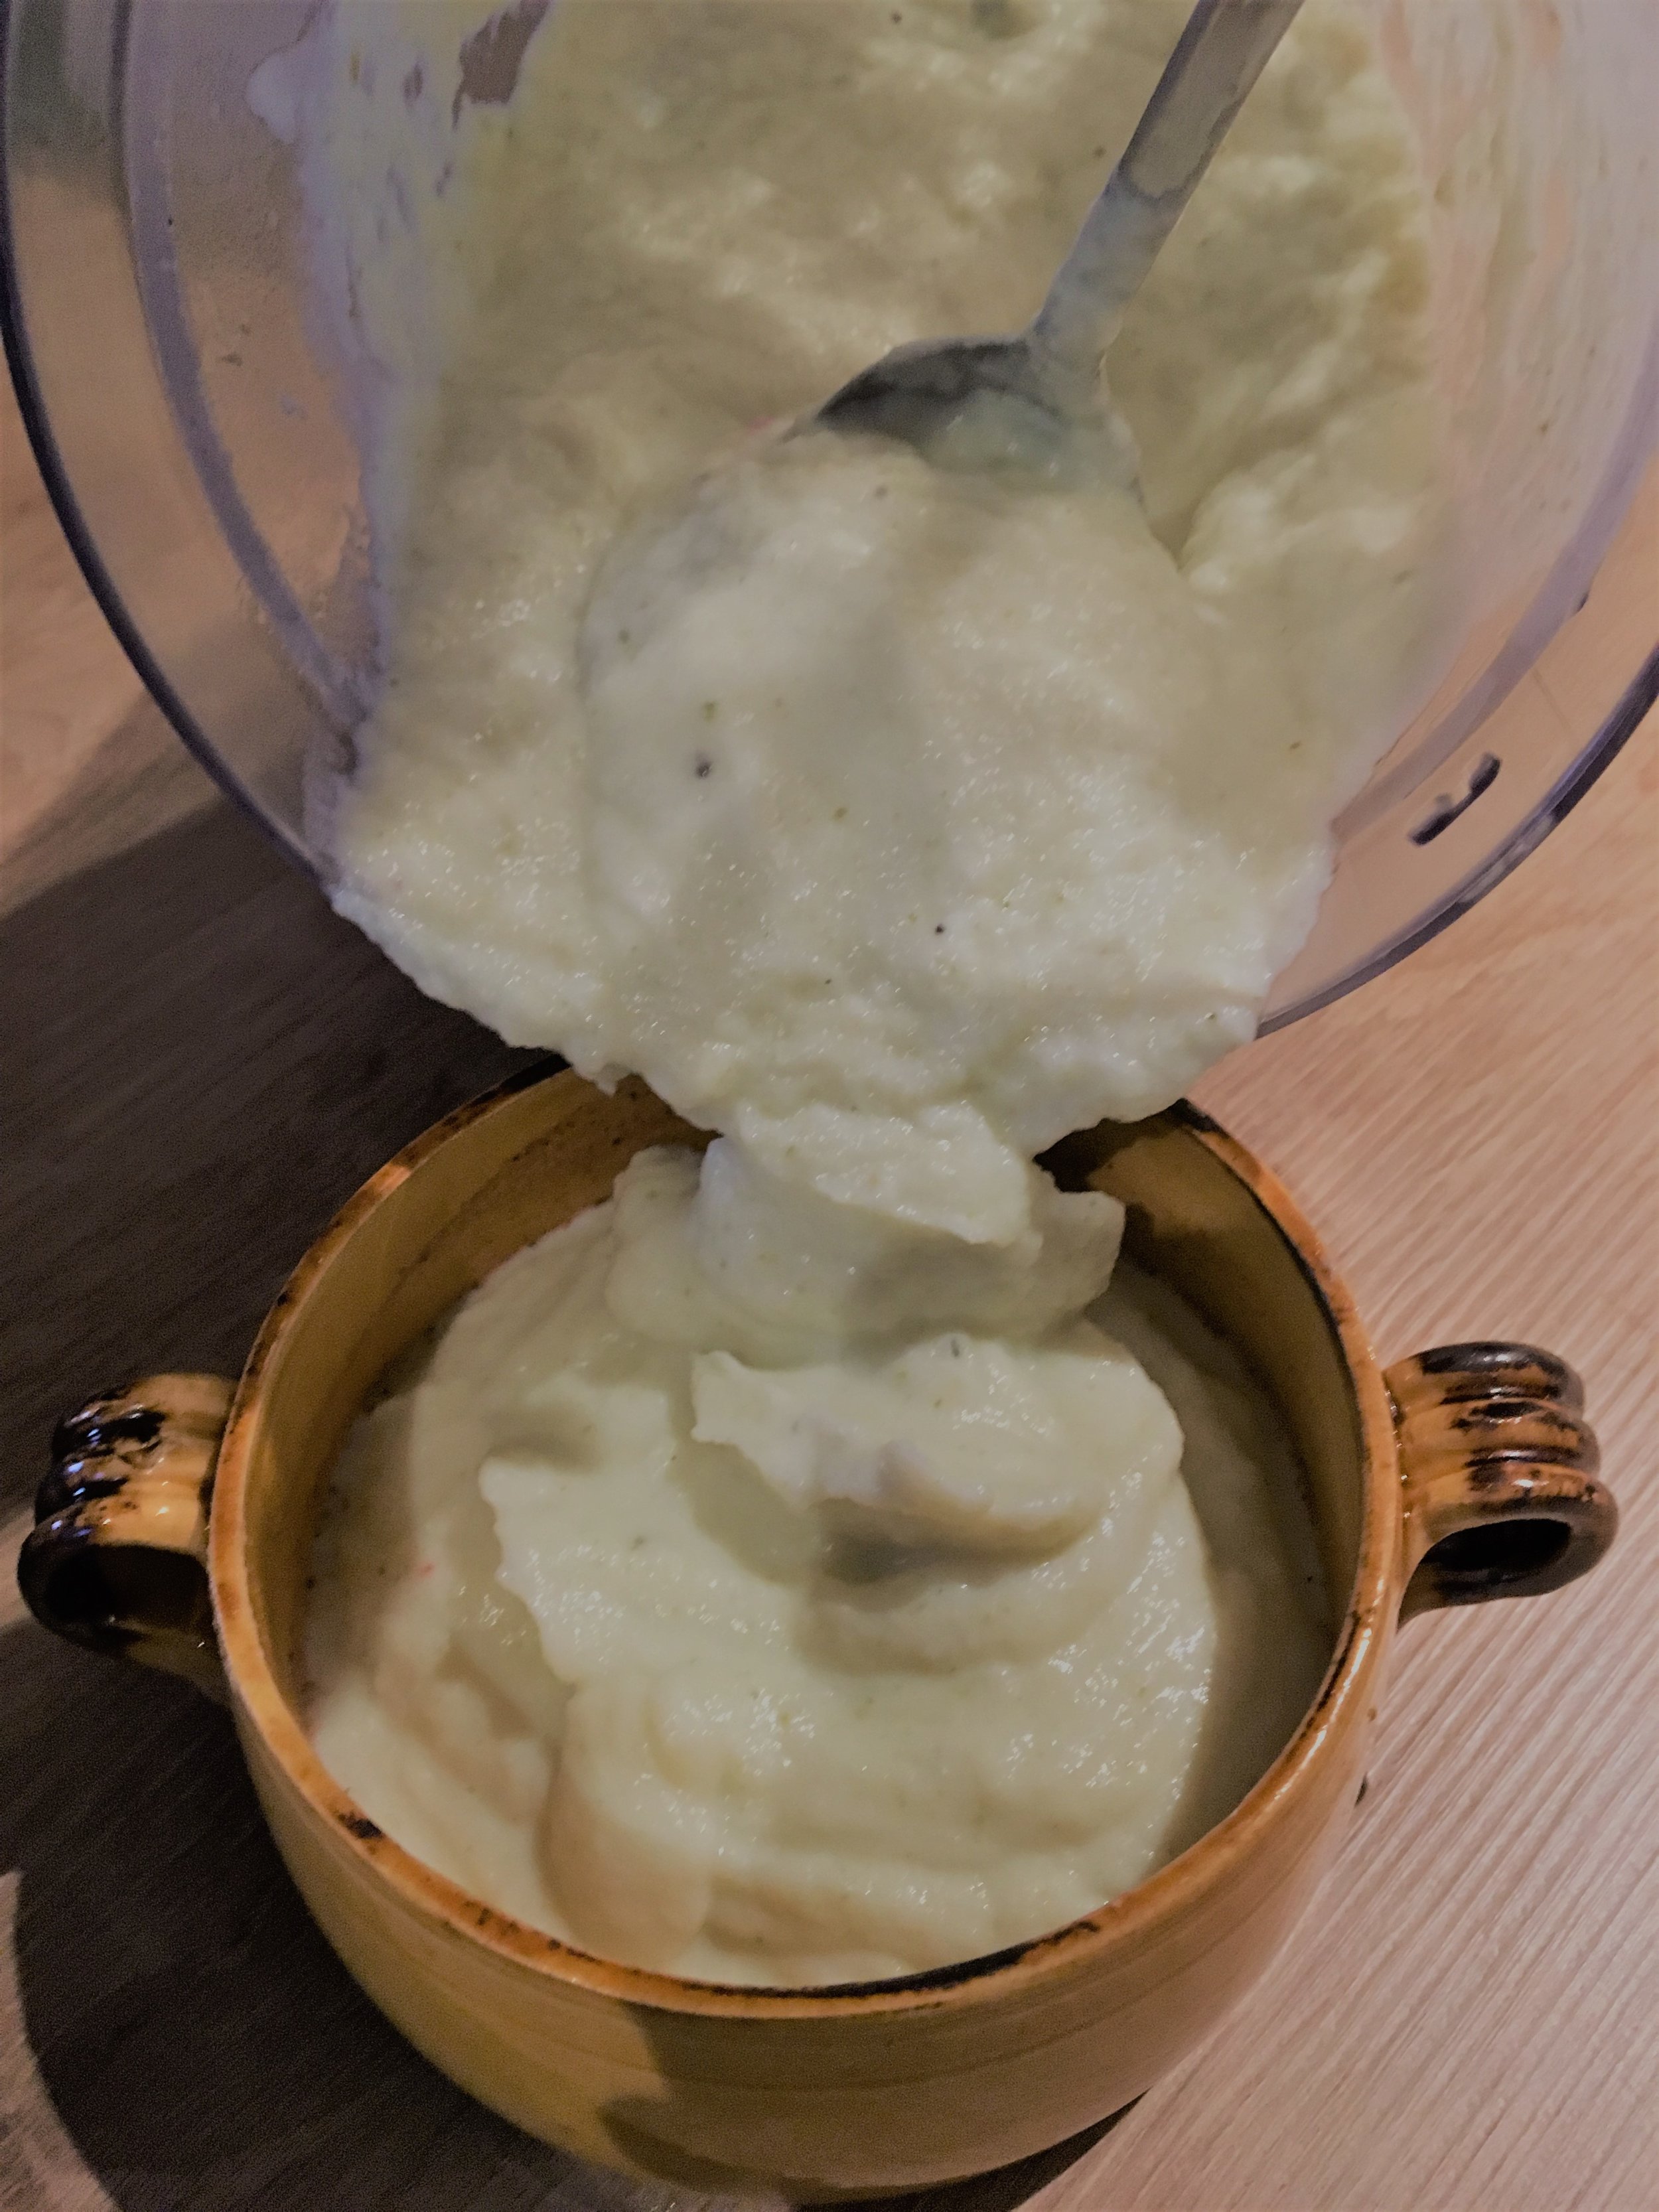  1. Cut the cauliflower and peel the garlic. Steam for 30 minutes.  2. Put all the ingredients in a blender and puree. 